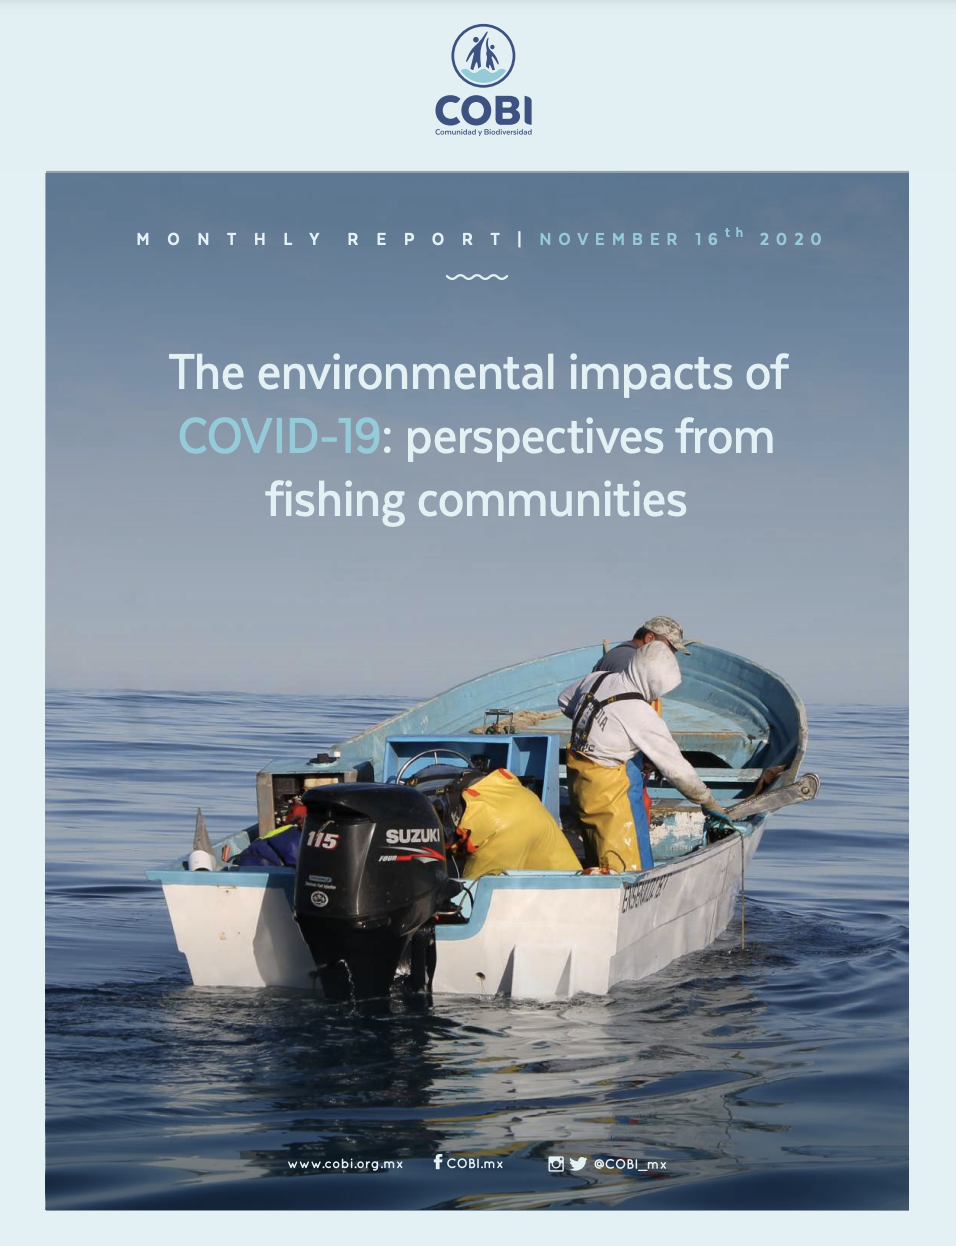 The environmental impacts of COVID-19: perspectives from fishing communities